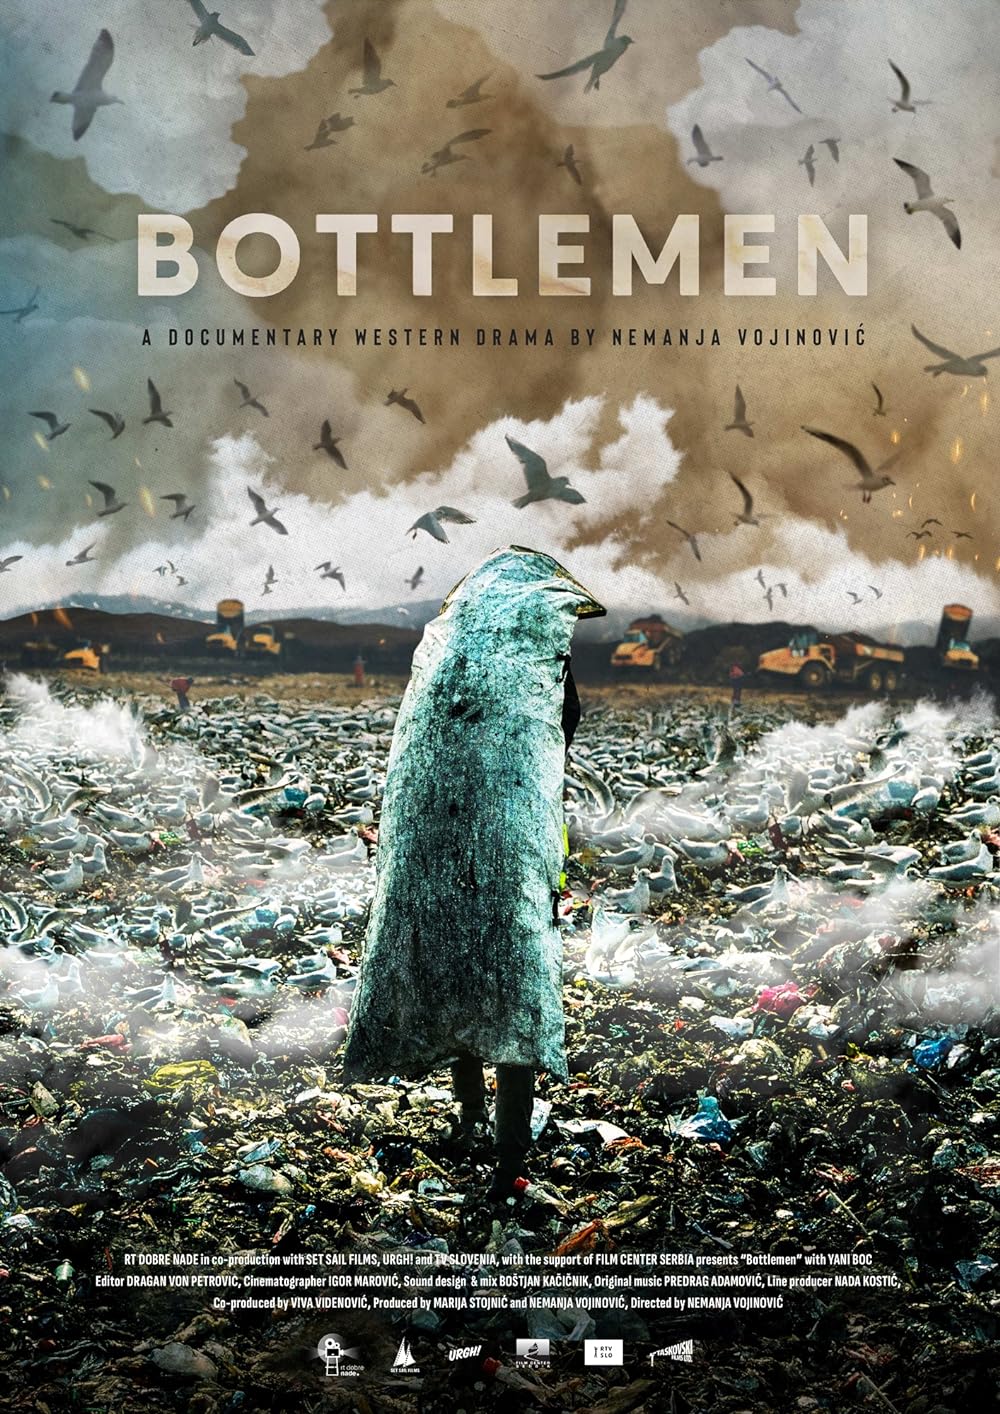 An apocalyptic scene: a figure wrapped in a sack walks across a rubbish dump, seagulls circling overhead.